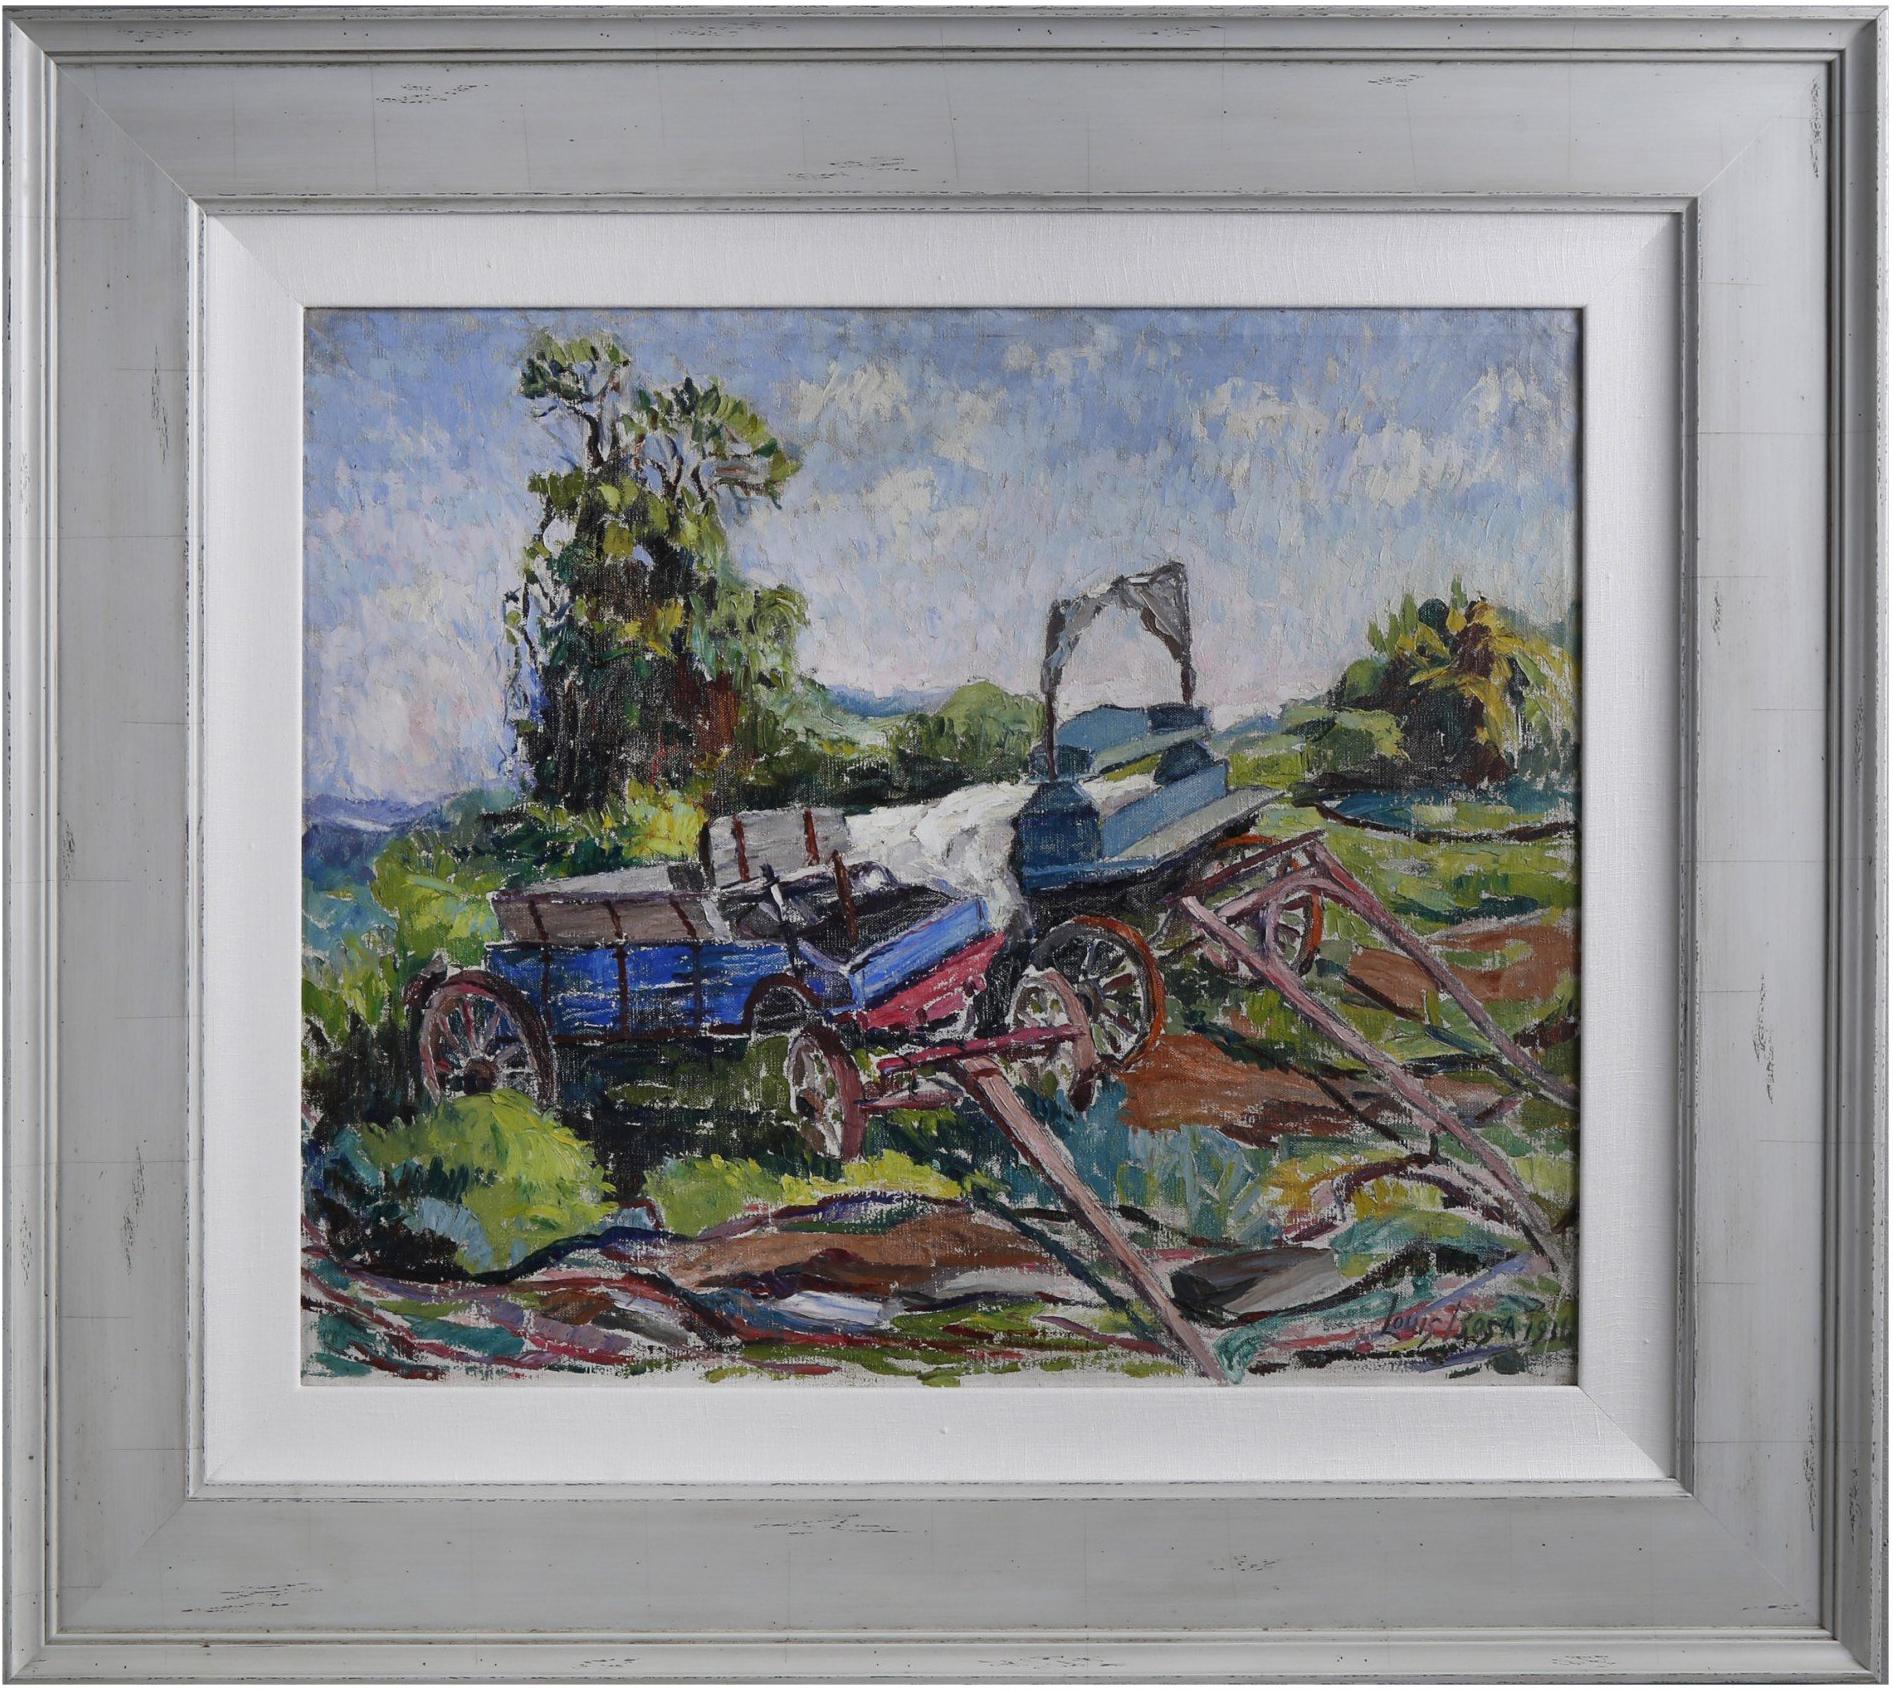 Two Wagons, Bucks County, PA 20th Century Farm Landscape - Expressionist Painting by Louis Bosa